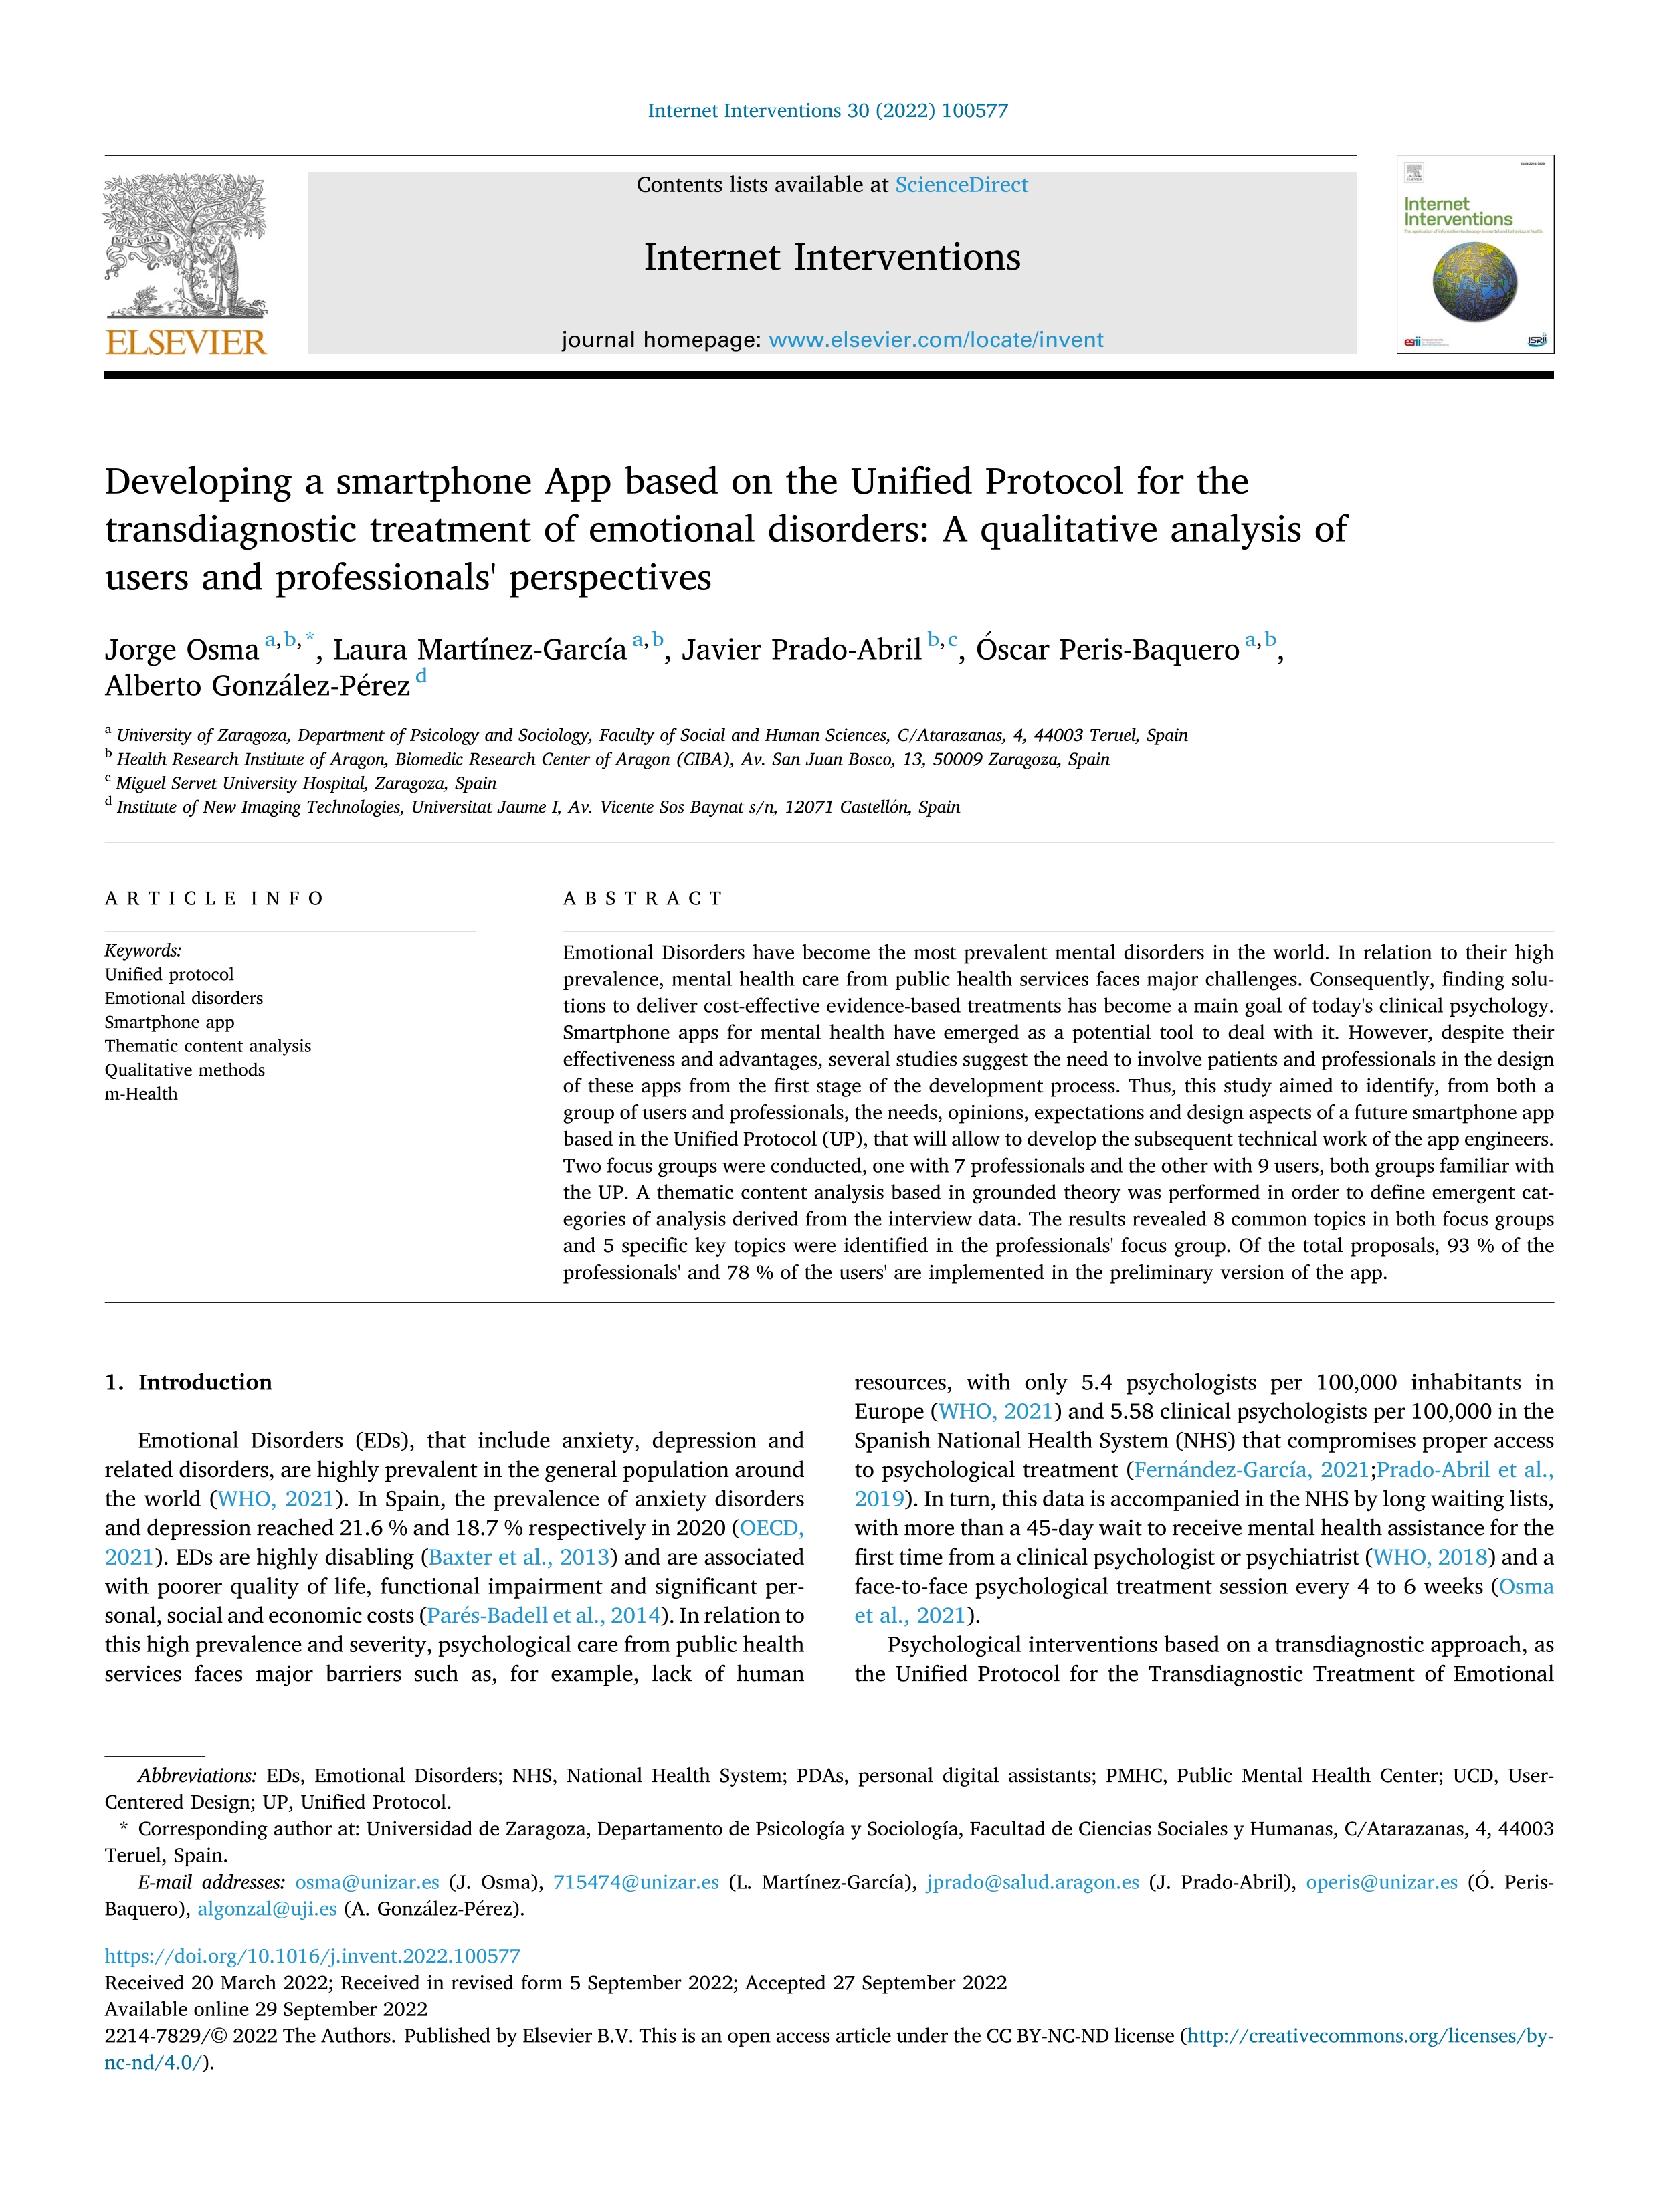 Developing a smartphone app based on the unified protocol for the transdiagnostic treatment of emotional disorders: a qualitative analysis of users and professionals' perspectives